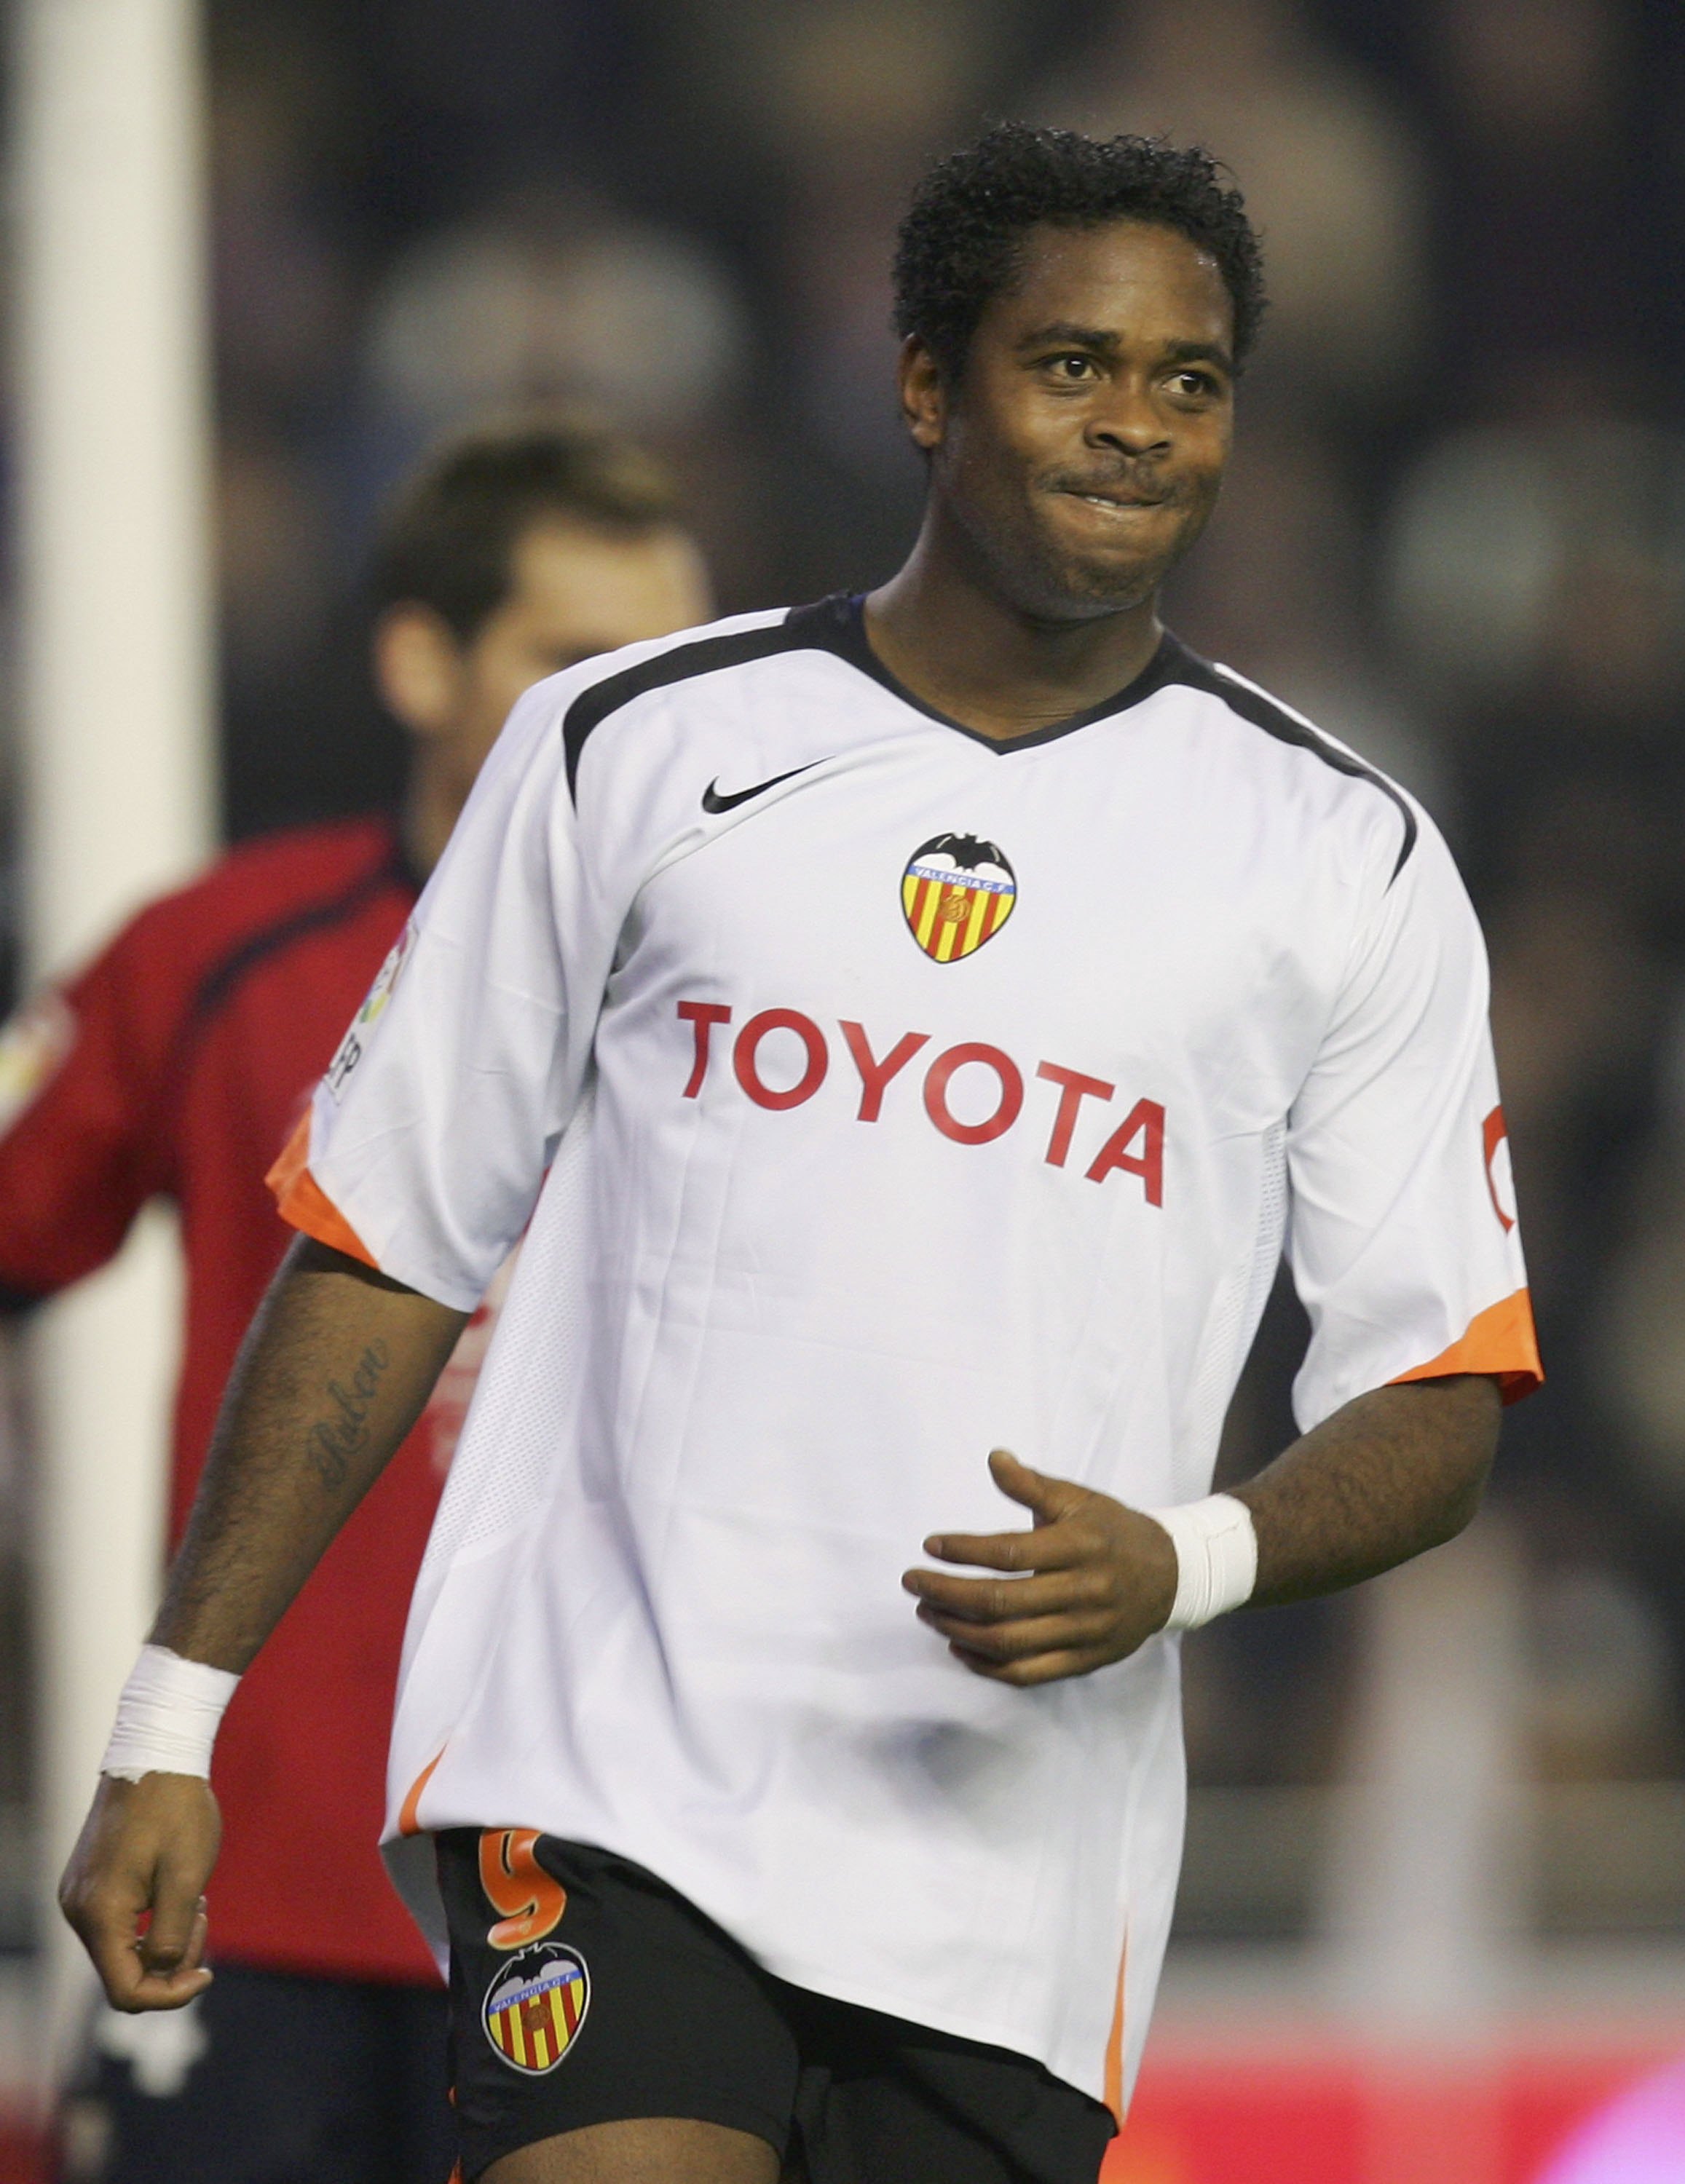 VALENCIA, SPAIN - JANUARY 14:  Patrick Kluivert of Valencia reacts after missing a shot on goal during a Primera Liga match between Valencia and Osasuna at the Mestalla stadium on January 14, 2006 in Valencia, Spain.  (Photo by Denis Doyle/Getty Images)